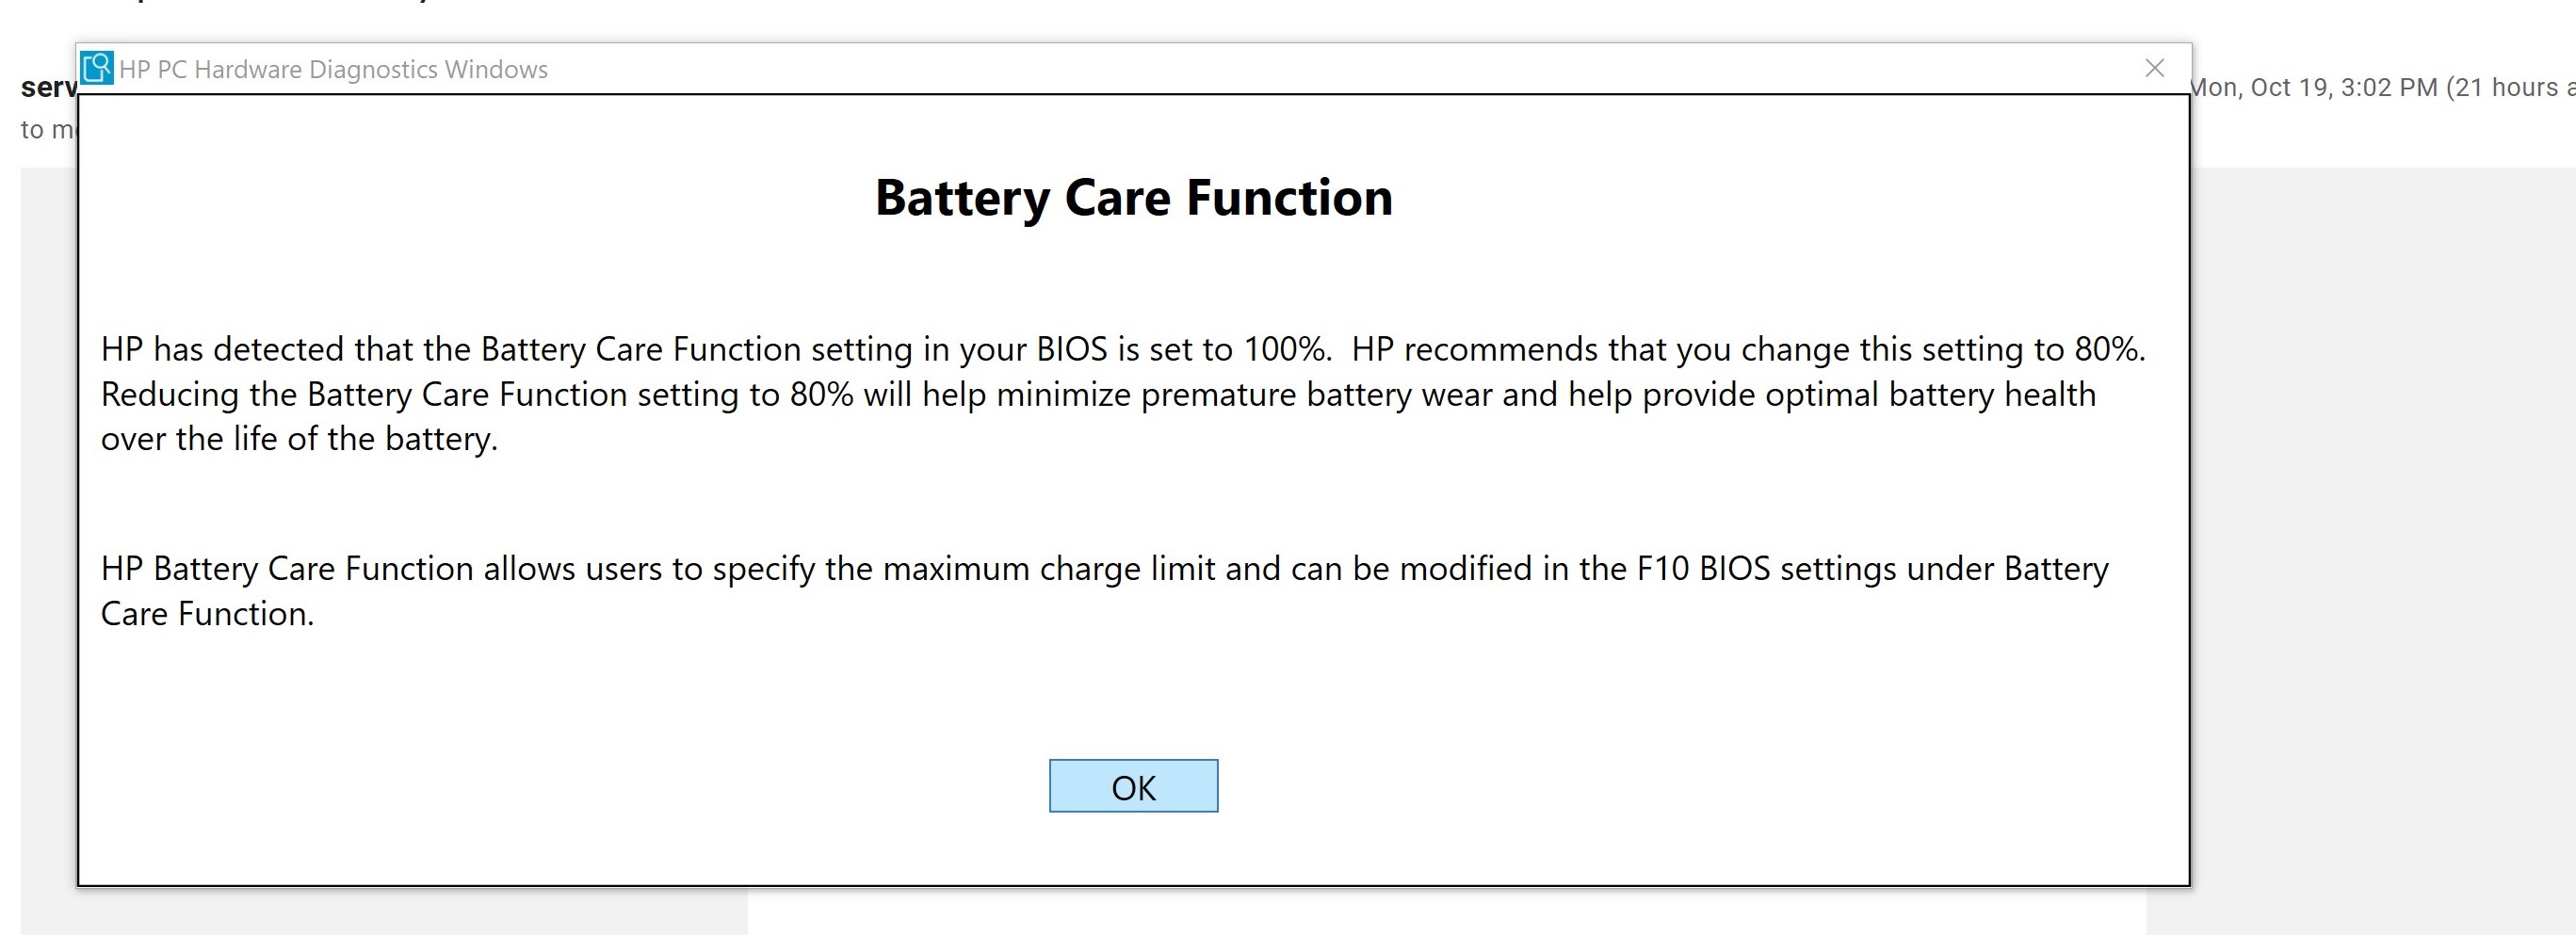 Battery Care Function in BIOS? - HP Support Community - 7821458